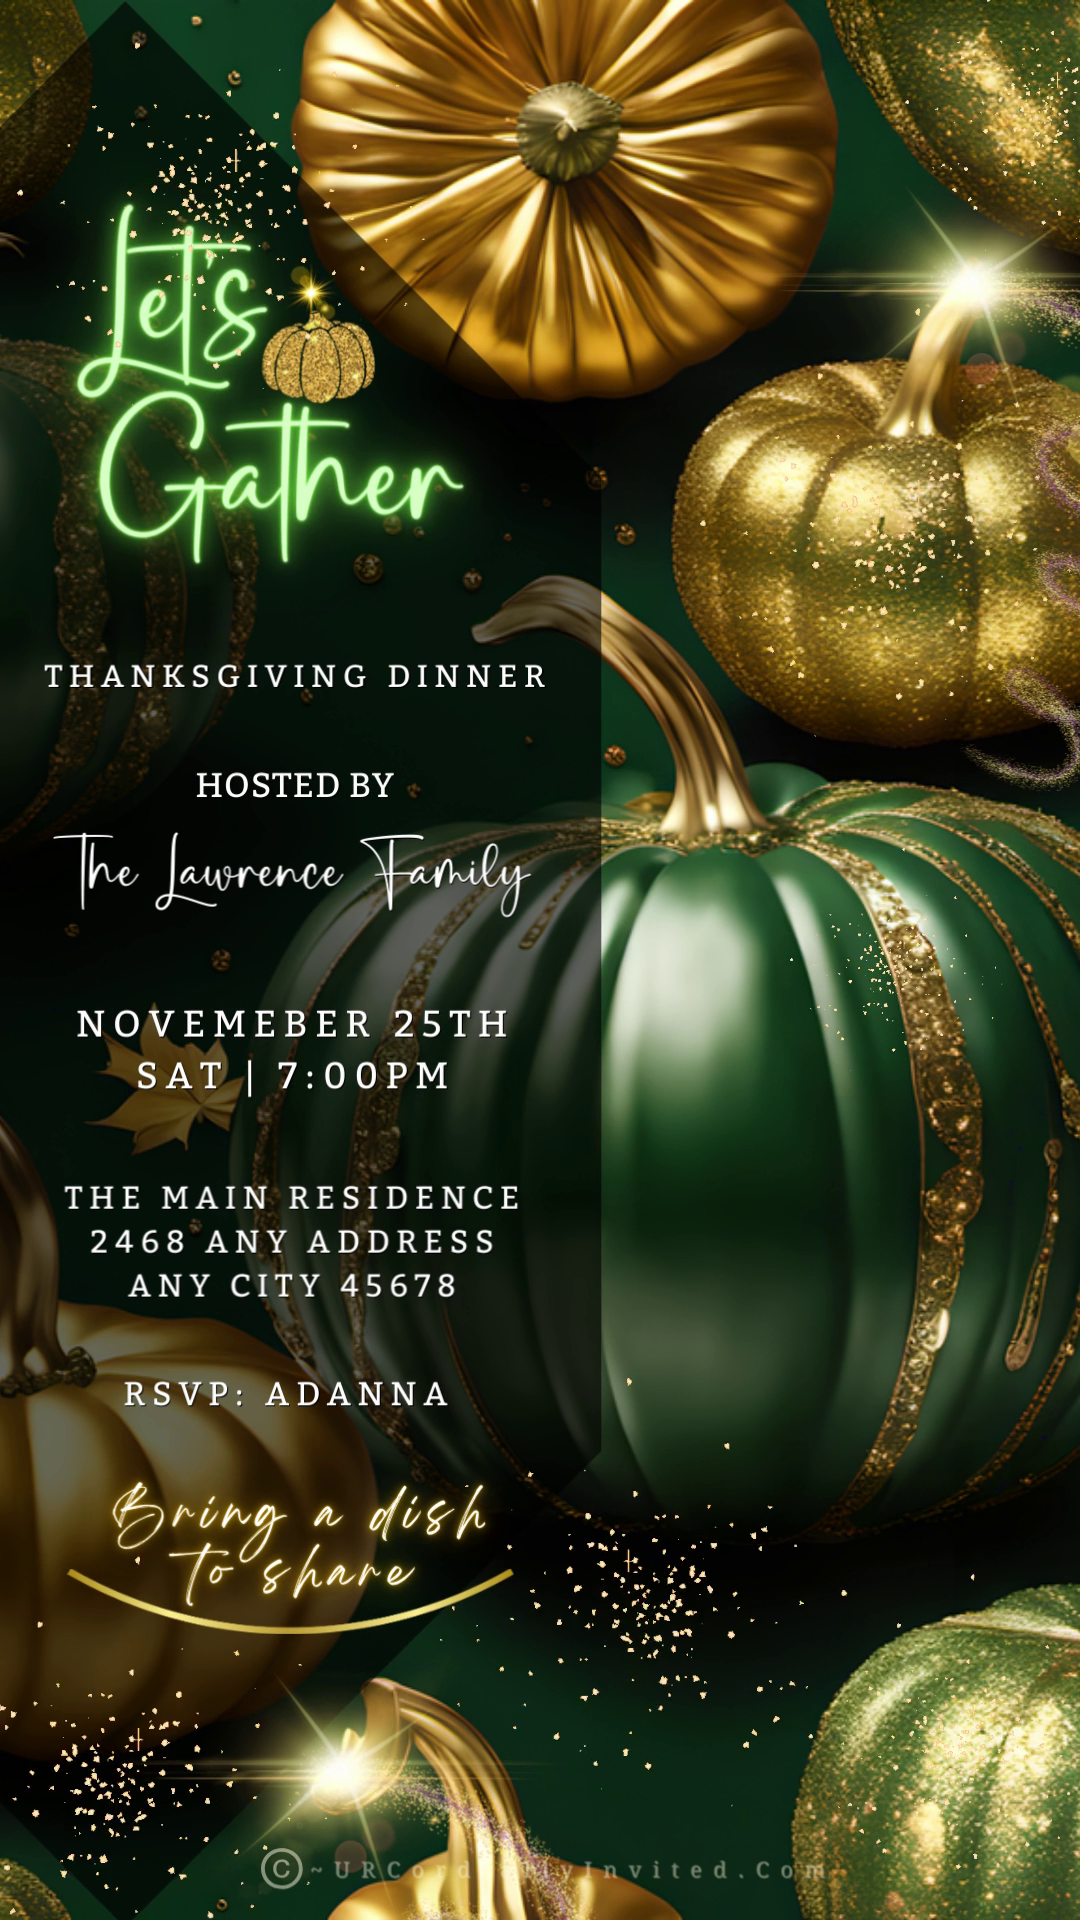 Green Gold Pumpkin Glitter Thanksgiving Dinner Video Invite template, customizable with Canva, featuring green and gold pumpkins, available for digital sharing via text, email, or social media.